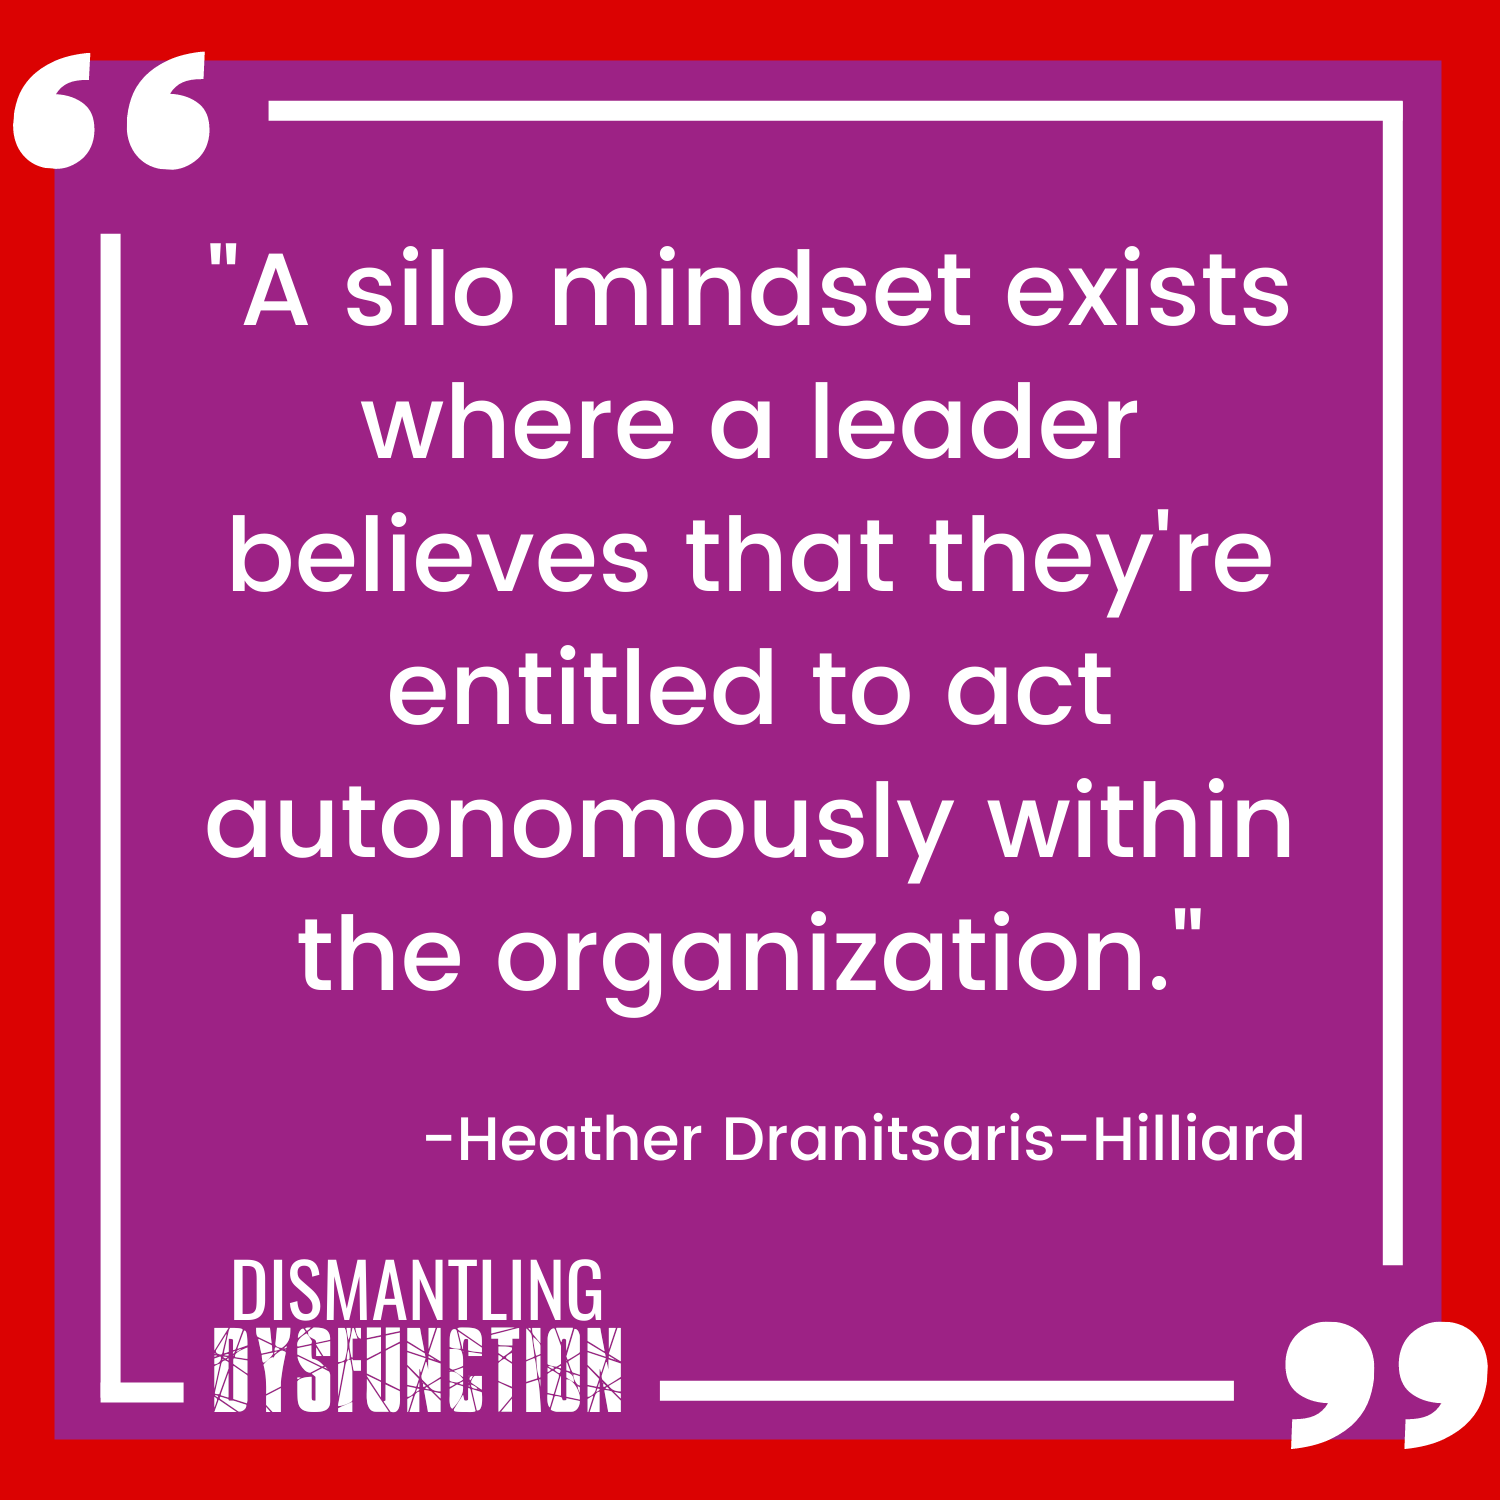 "A silo mindset exists where a leader believes that they're entitled to act autonomously within the organization."